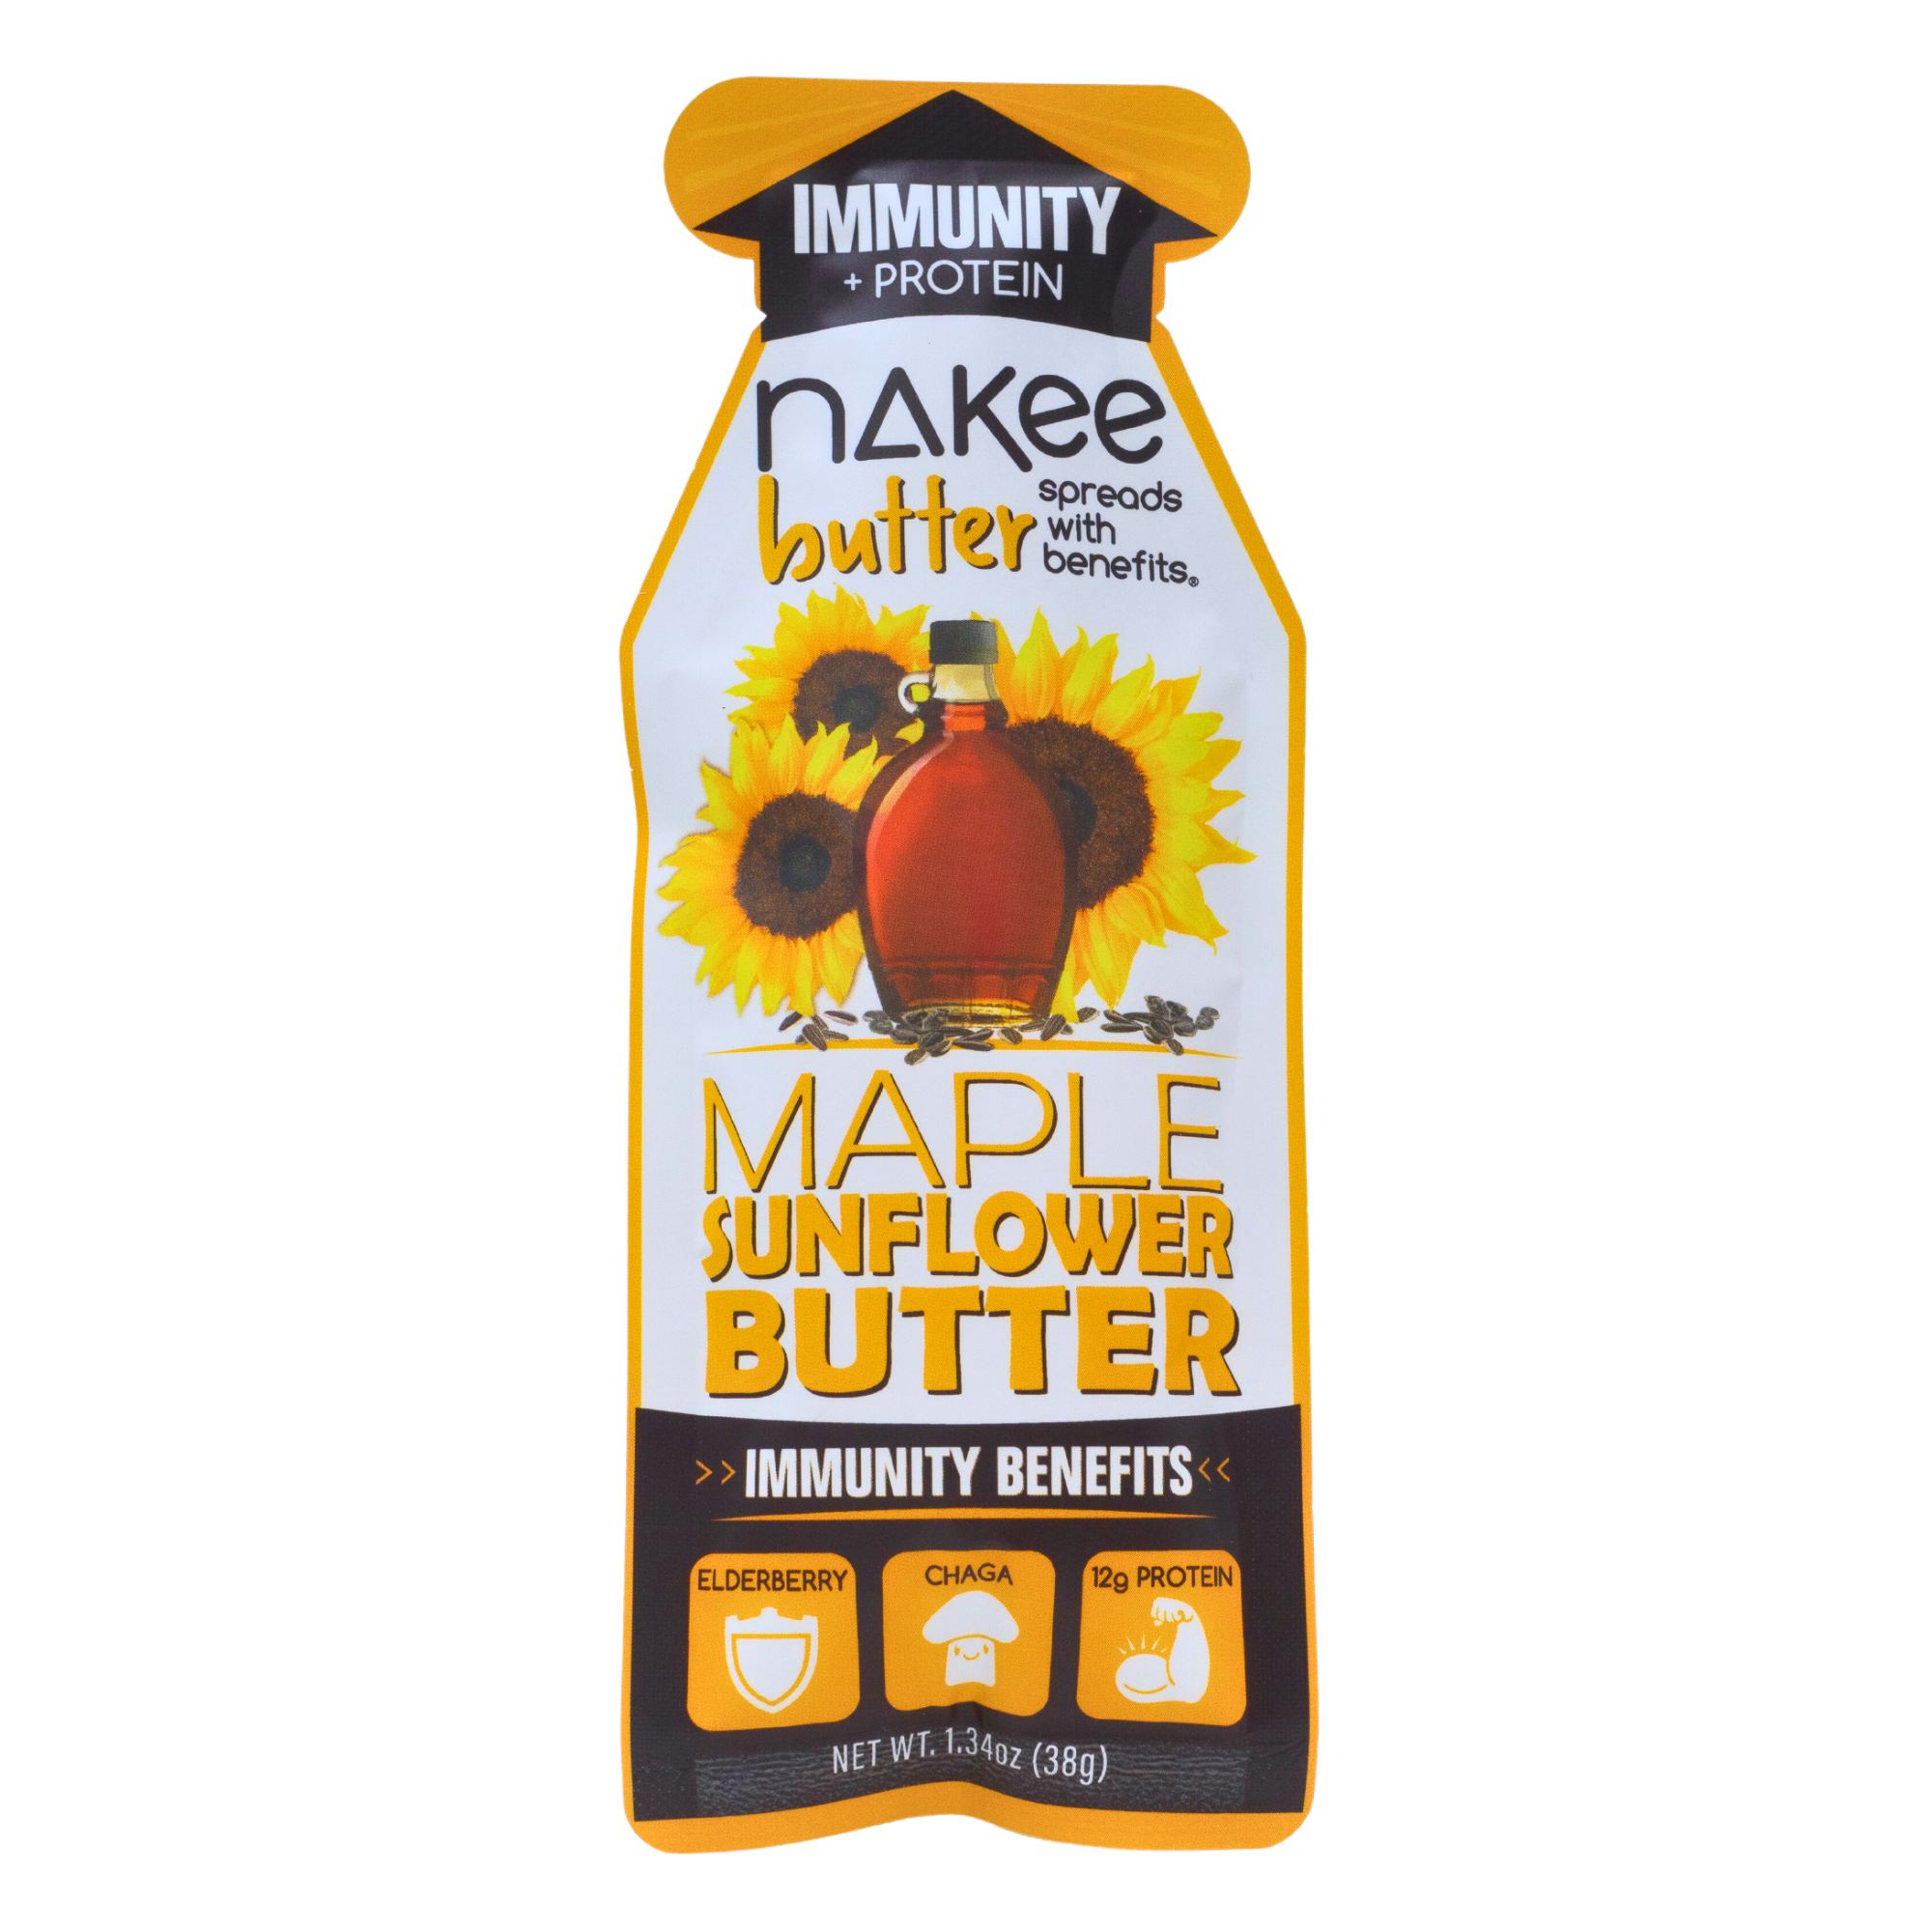 Nakee Butter Immunity Pouch